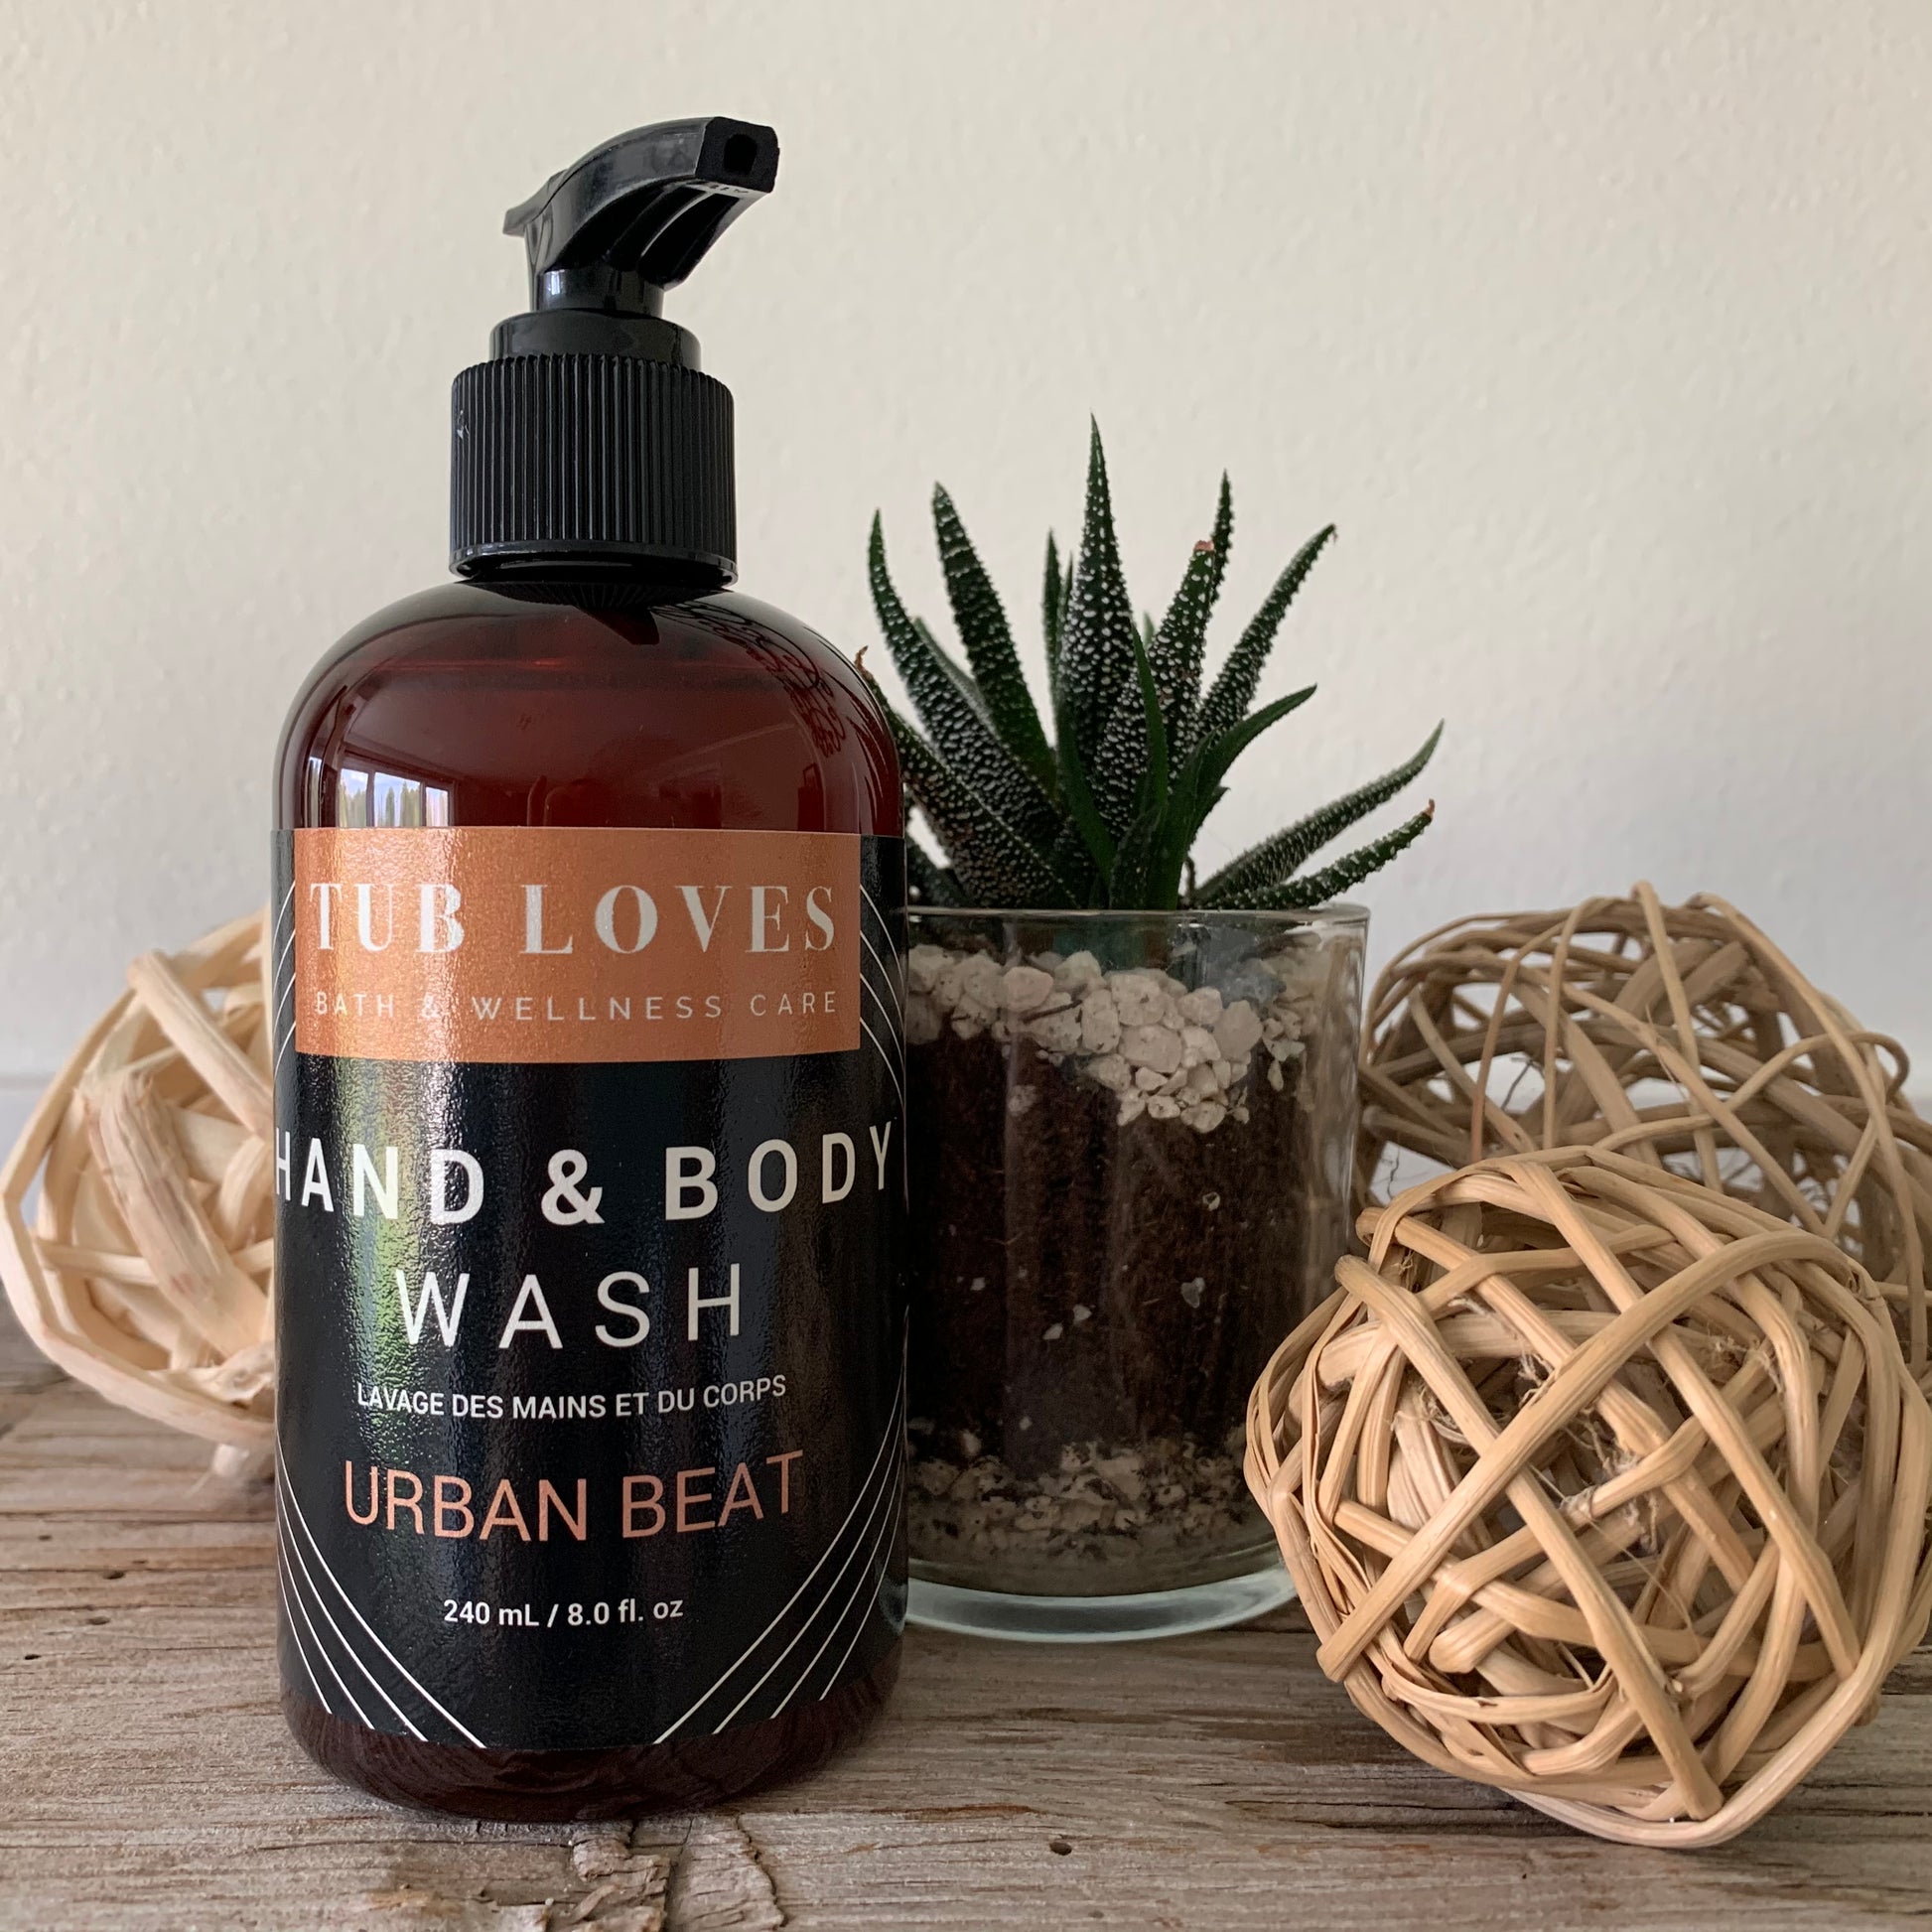 Urban Beat - Hand and Body Wash - Tub Loves